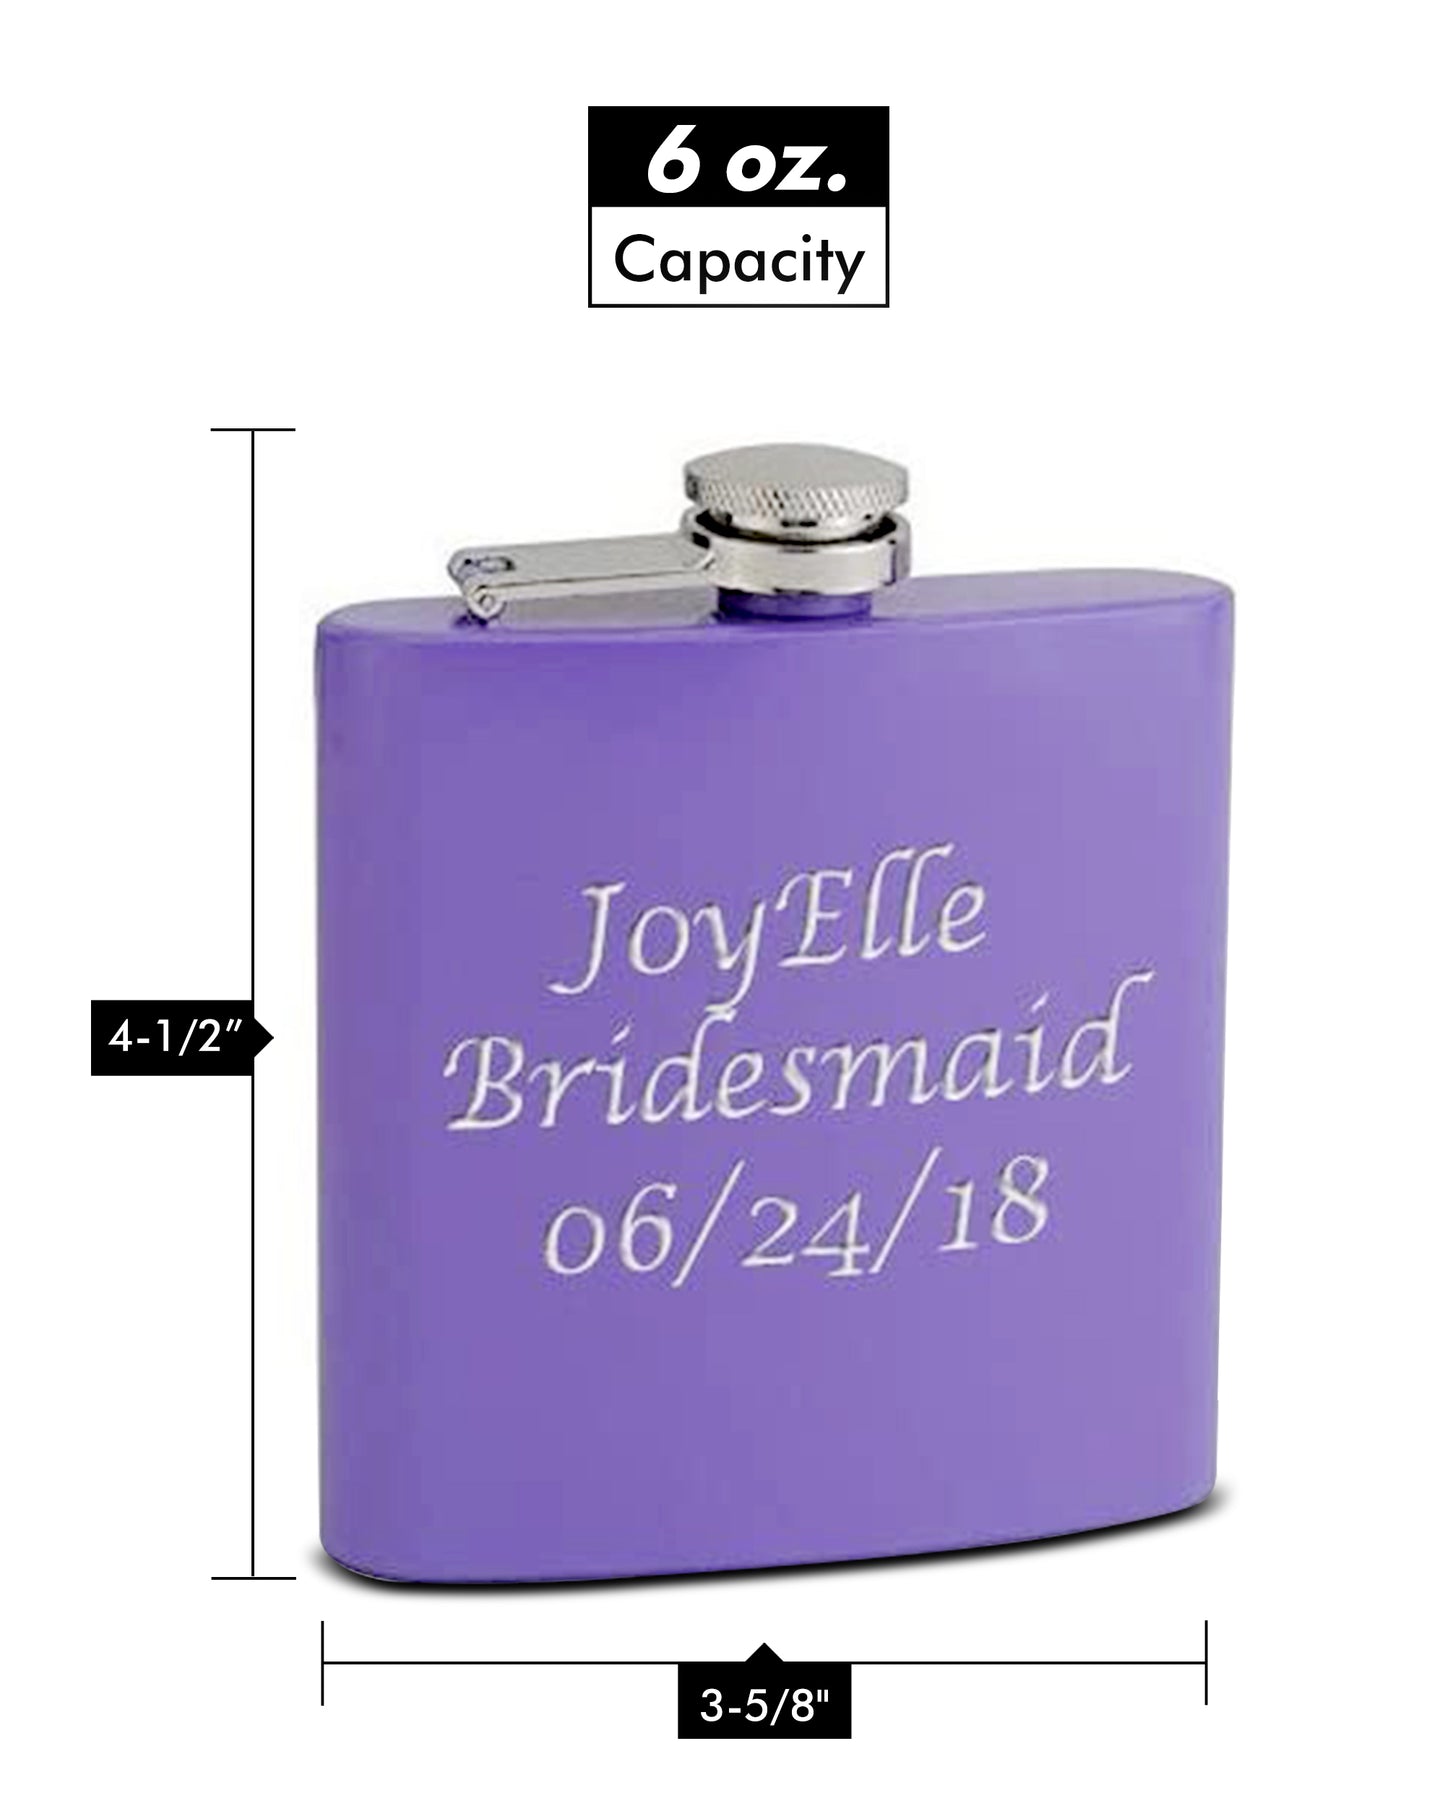 Hip Flask Holding 6 oz for Bridesmaid - Purple Finish, Stainless Steel, Screw-On Cap, Expertly Welded, Leakproof, Rustproof - Front Engravable for Personalized Gift